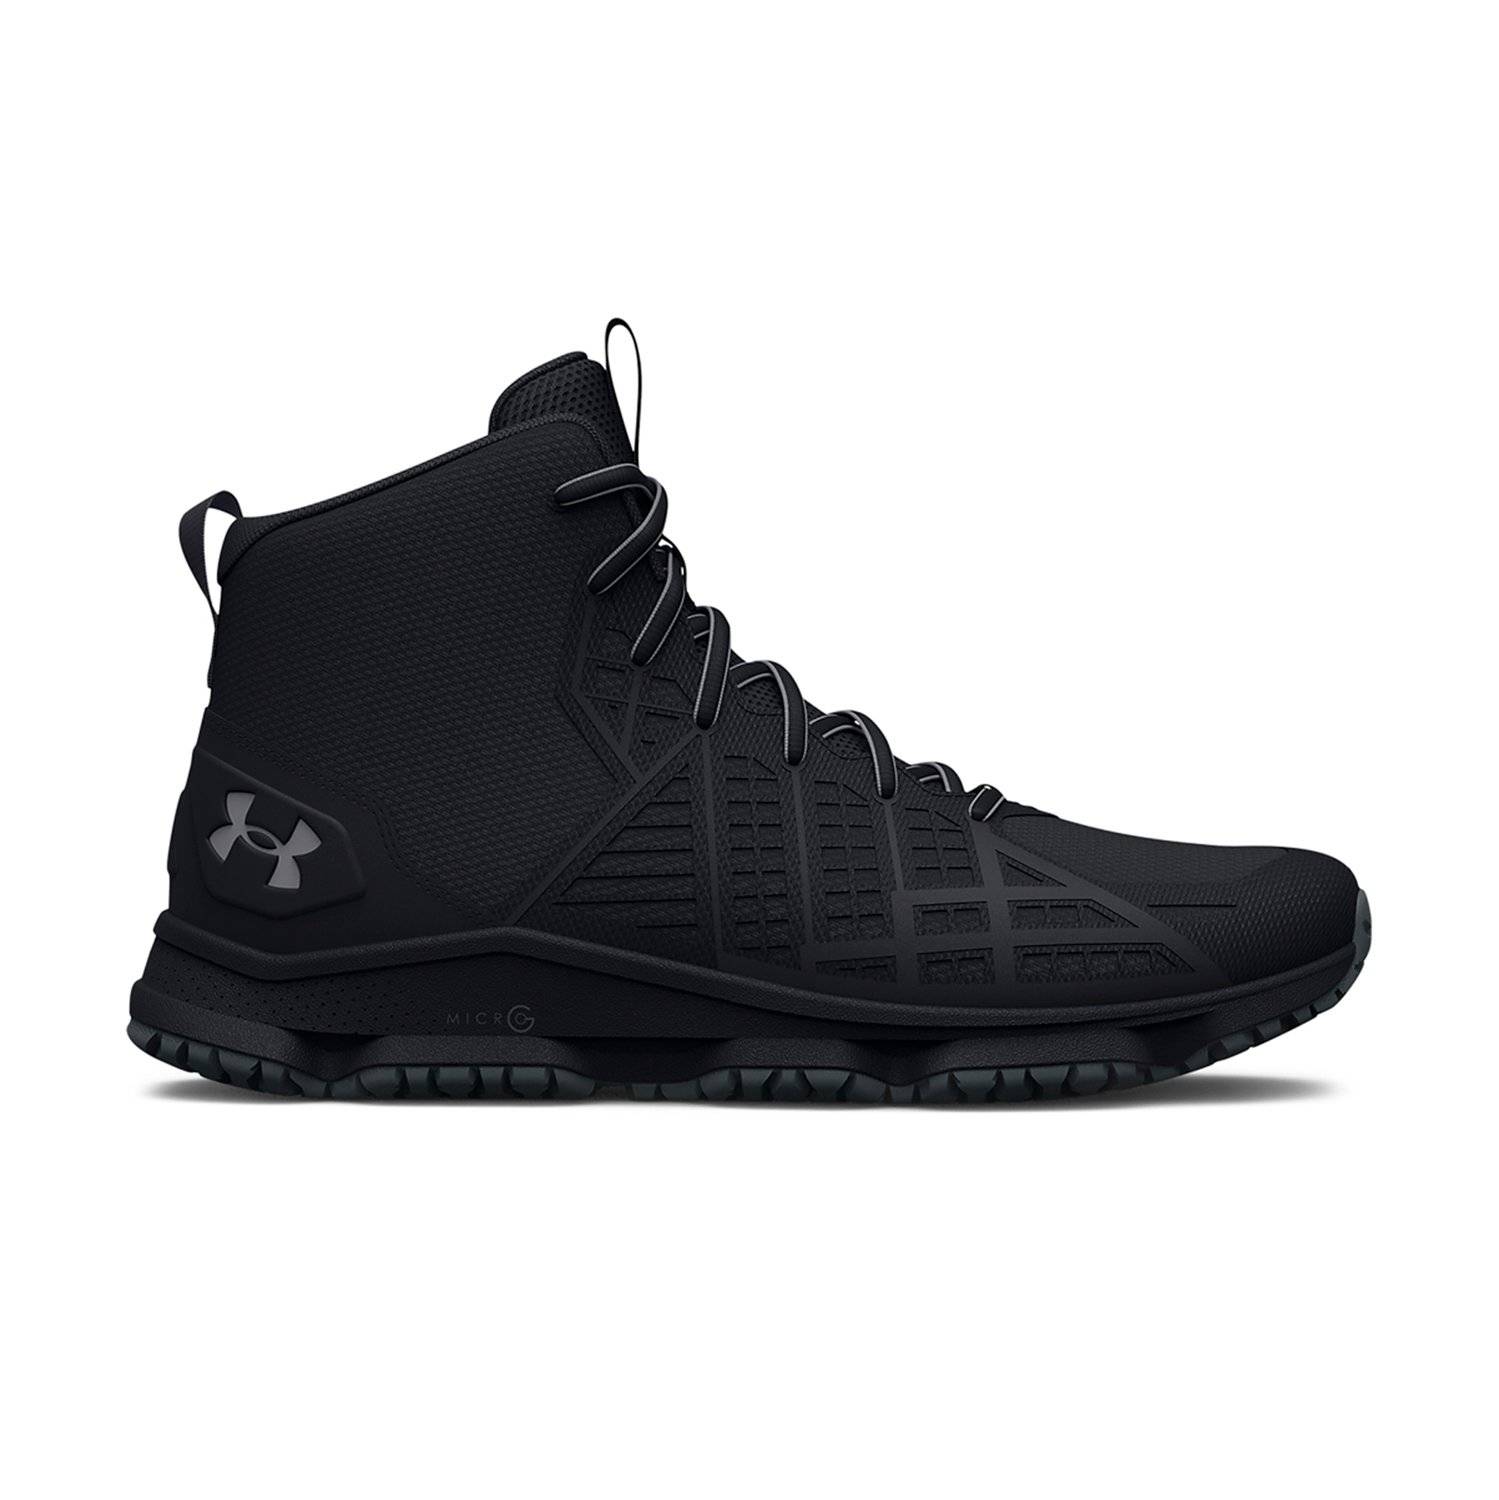 Under Armour Stellar G2 Men's Tactical Boots - Black/Pitch Gray